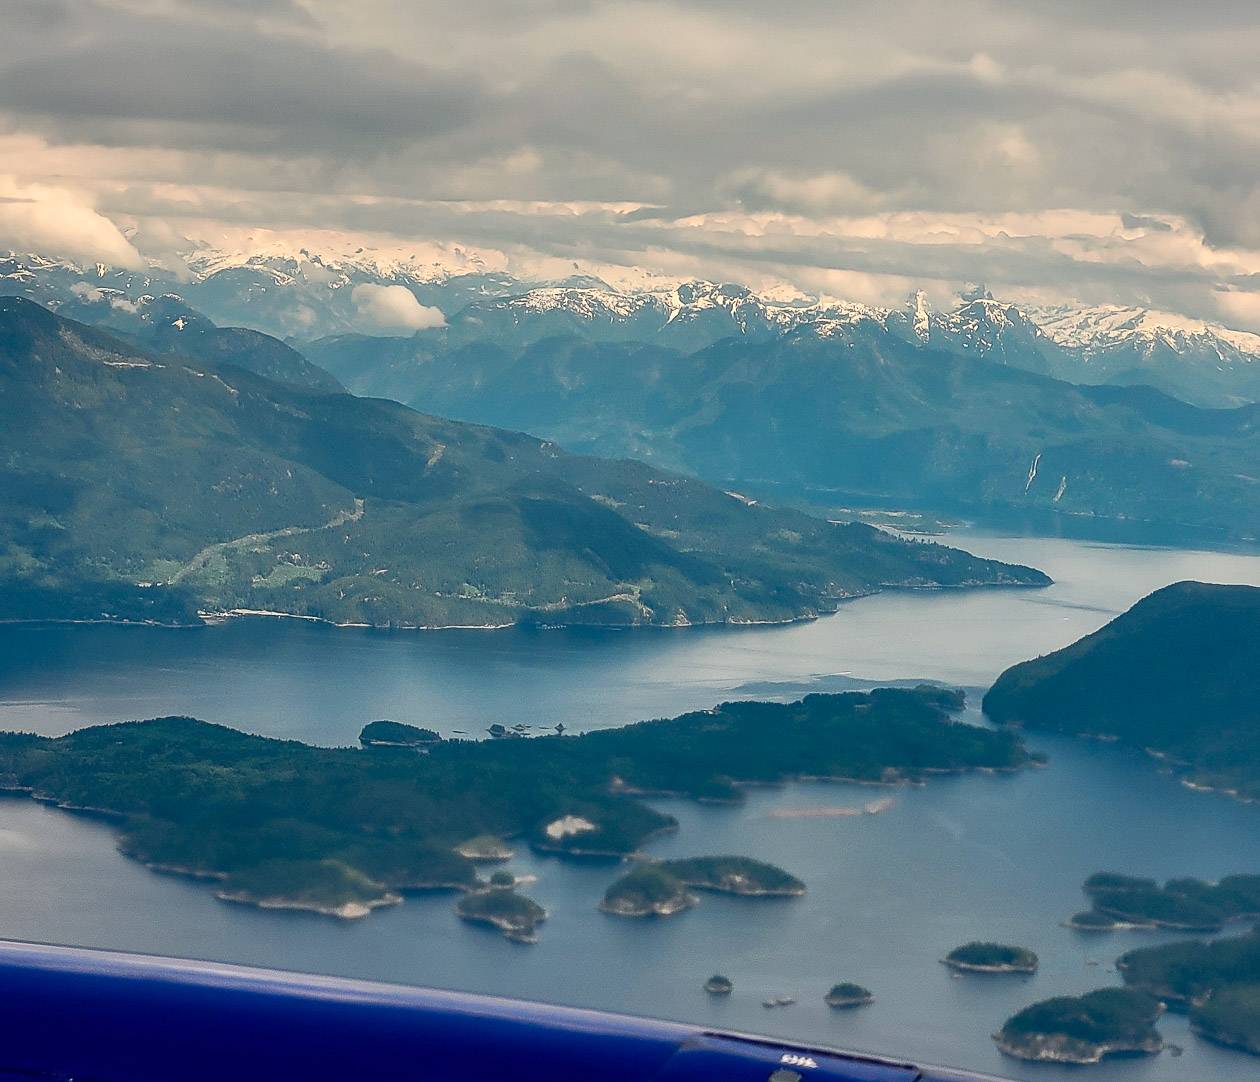 The view on my flight from Vancouver to Powell River